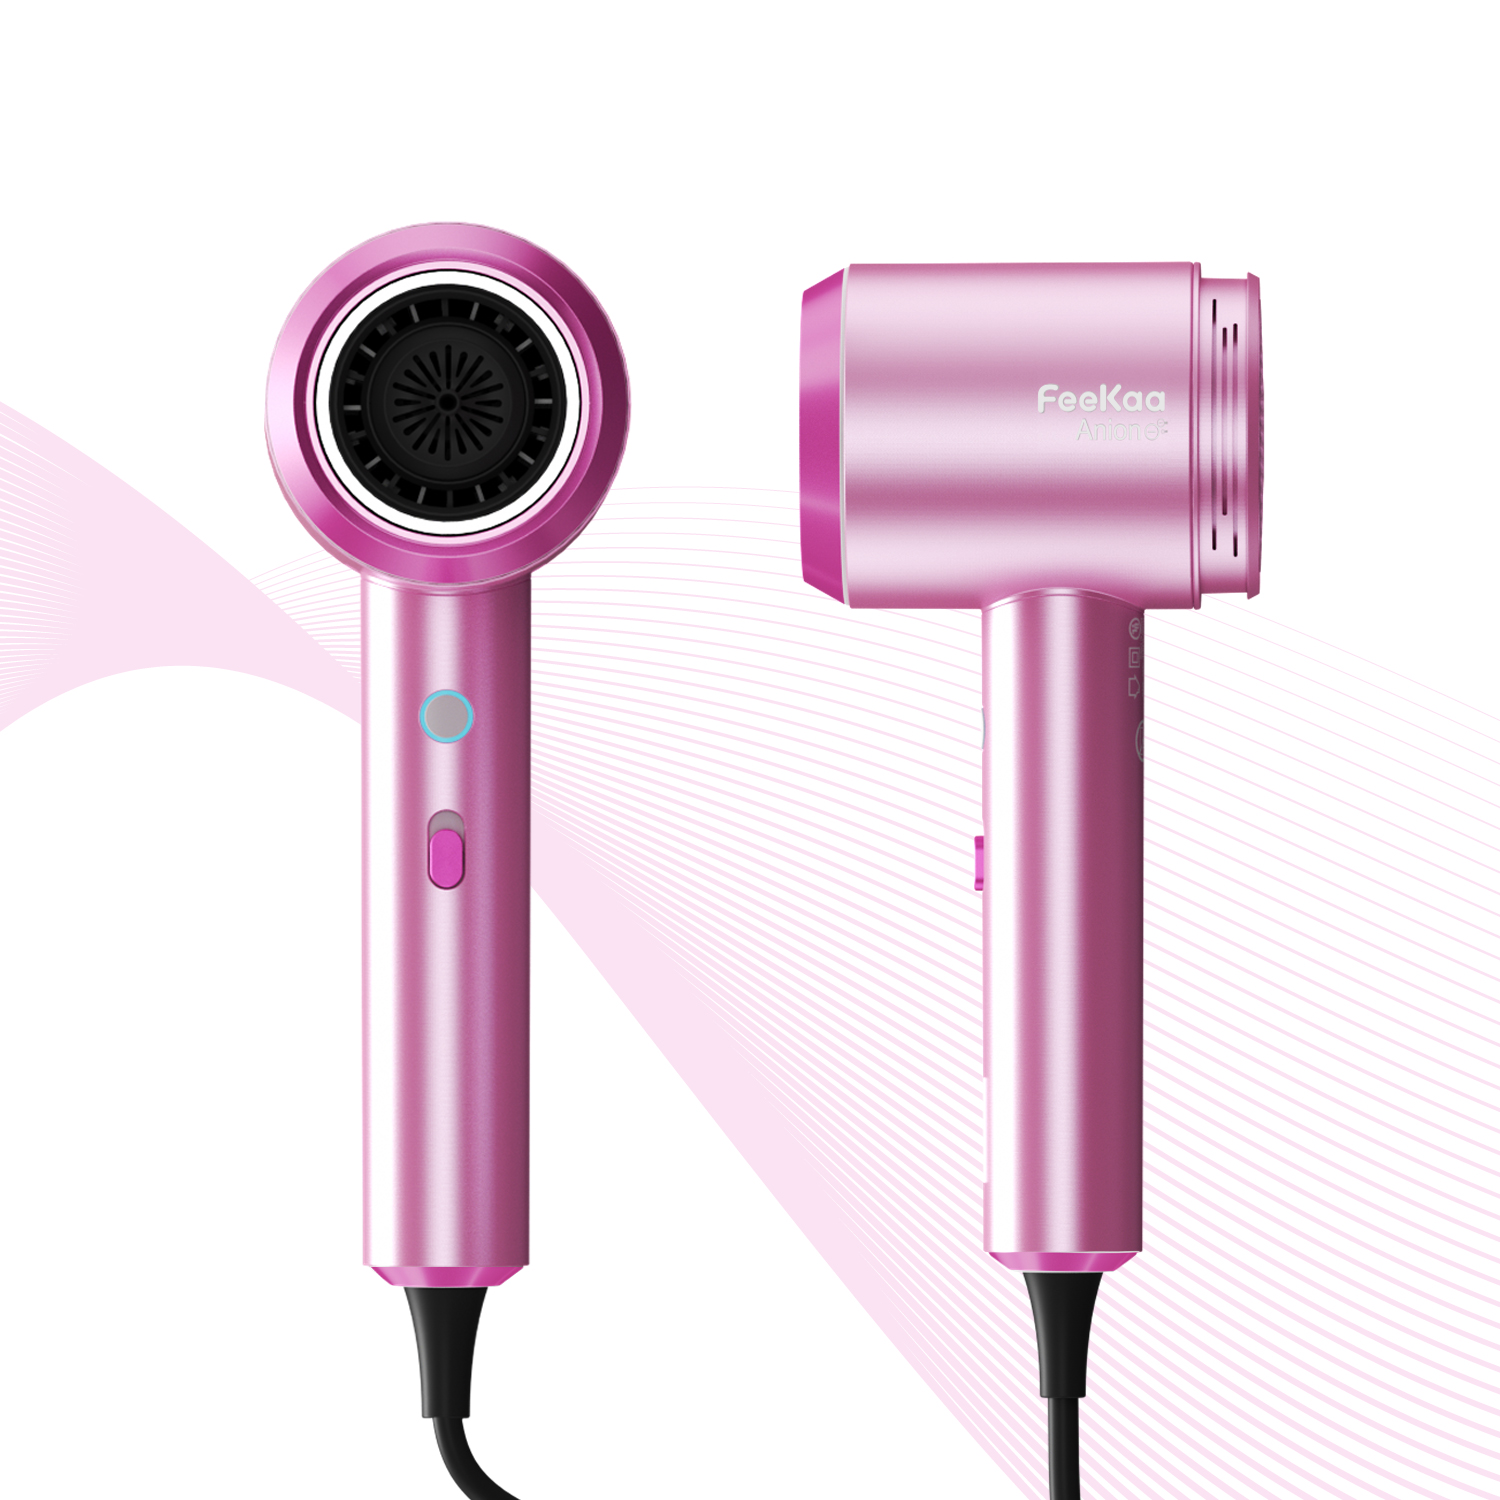 Lonic Hair Dryer, Feekaa Fast Drying Blow Dryer, 100 Million Negative Ion, Low Noise Lightweight Blowdryer for Shiny Hair, with Rotating Magnetic Nozzle, for Travel, Dog & Curly Hair, Purple Pink